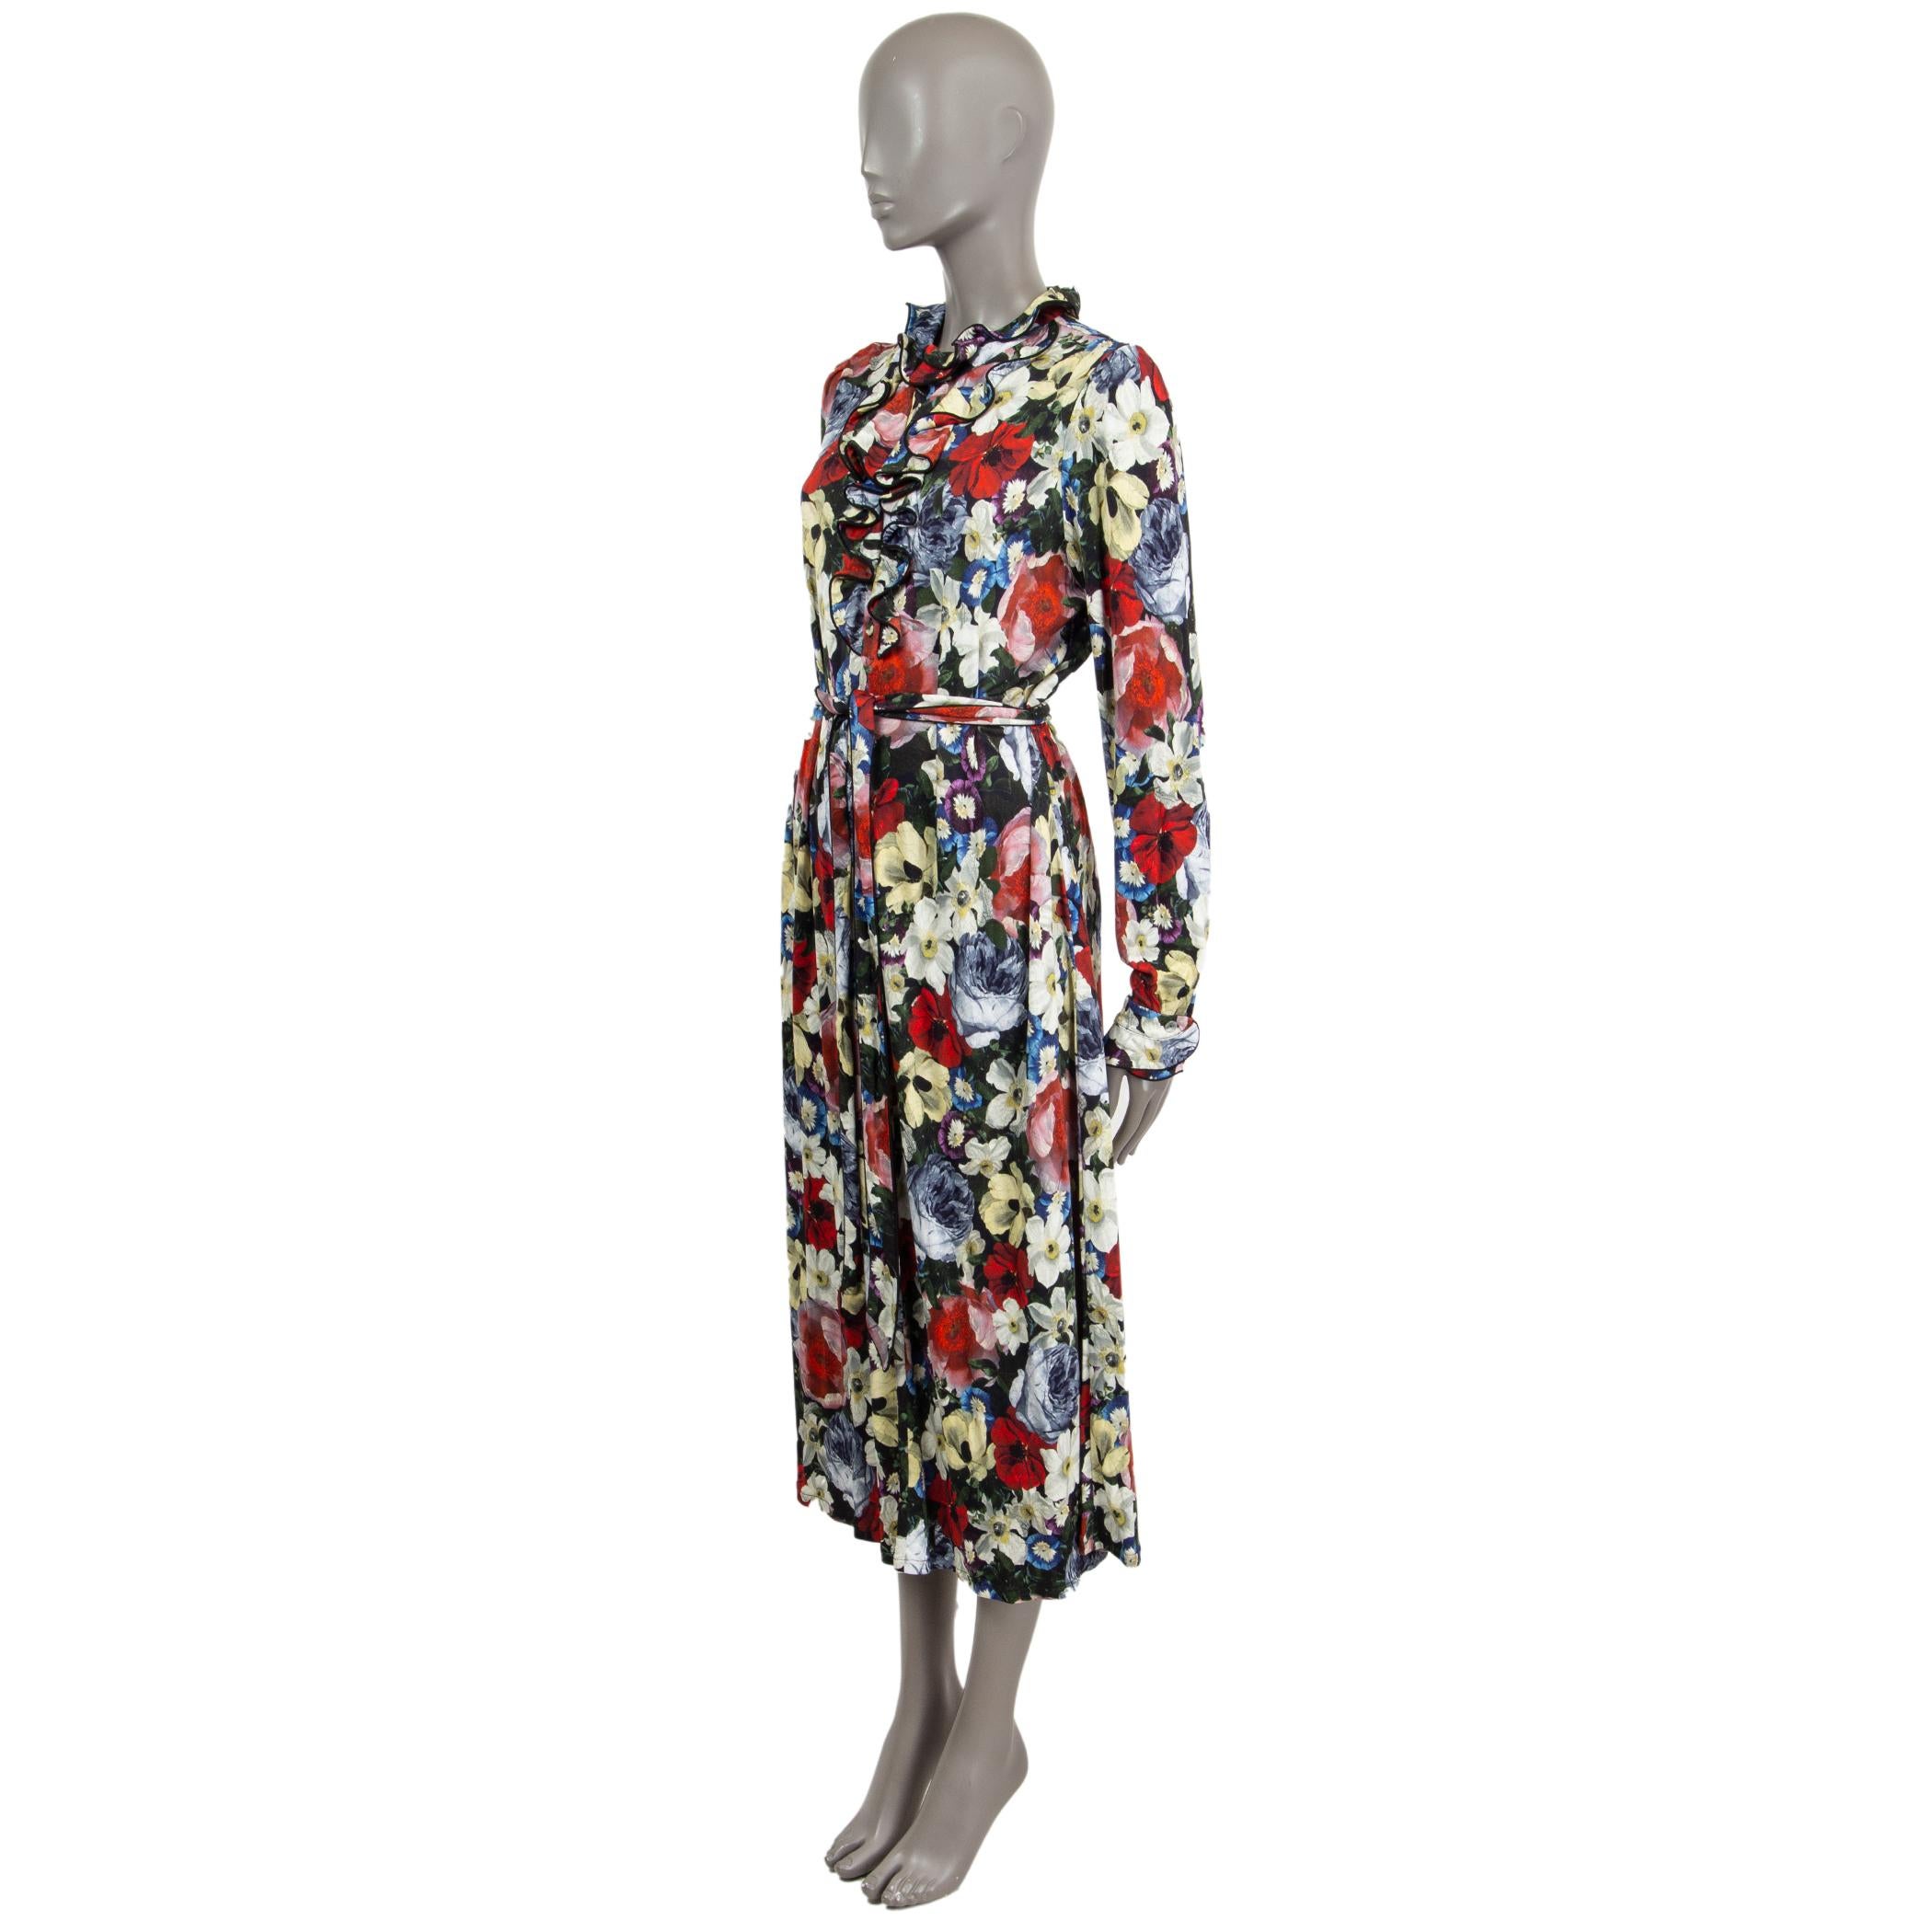 100% authentic Erdem Fiorella belted floral print dress in black, pink, dusty rose, yellow, blue and off-white viscose (100%). Features ruffled on the front and detachable waist tie buttoned cuffs. Opens with buttons on the front. Has been worn and